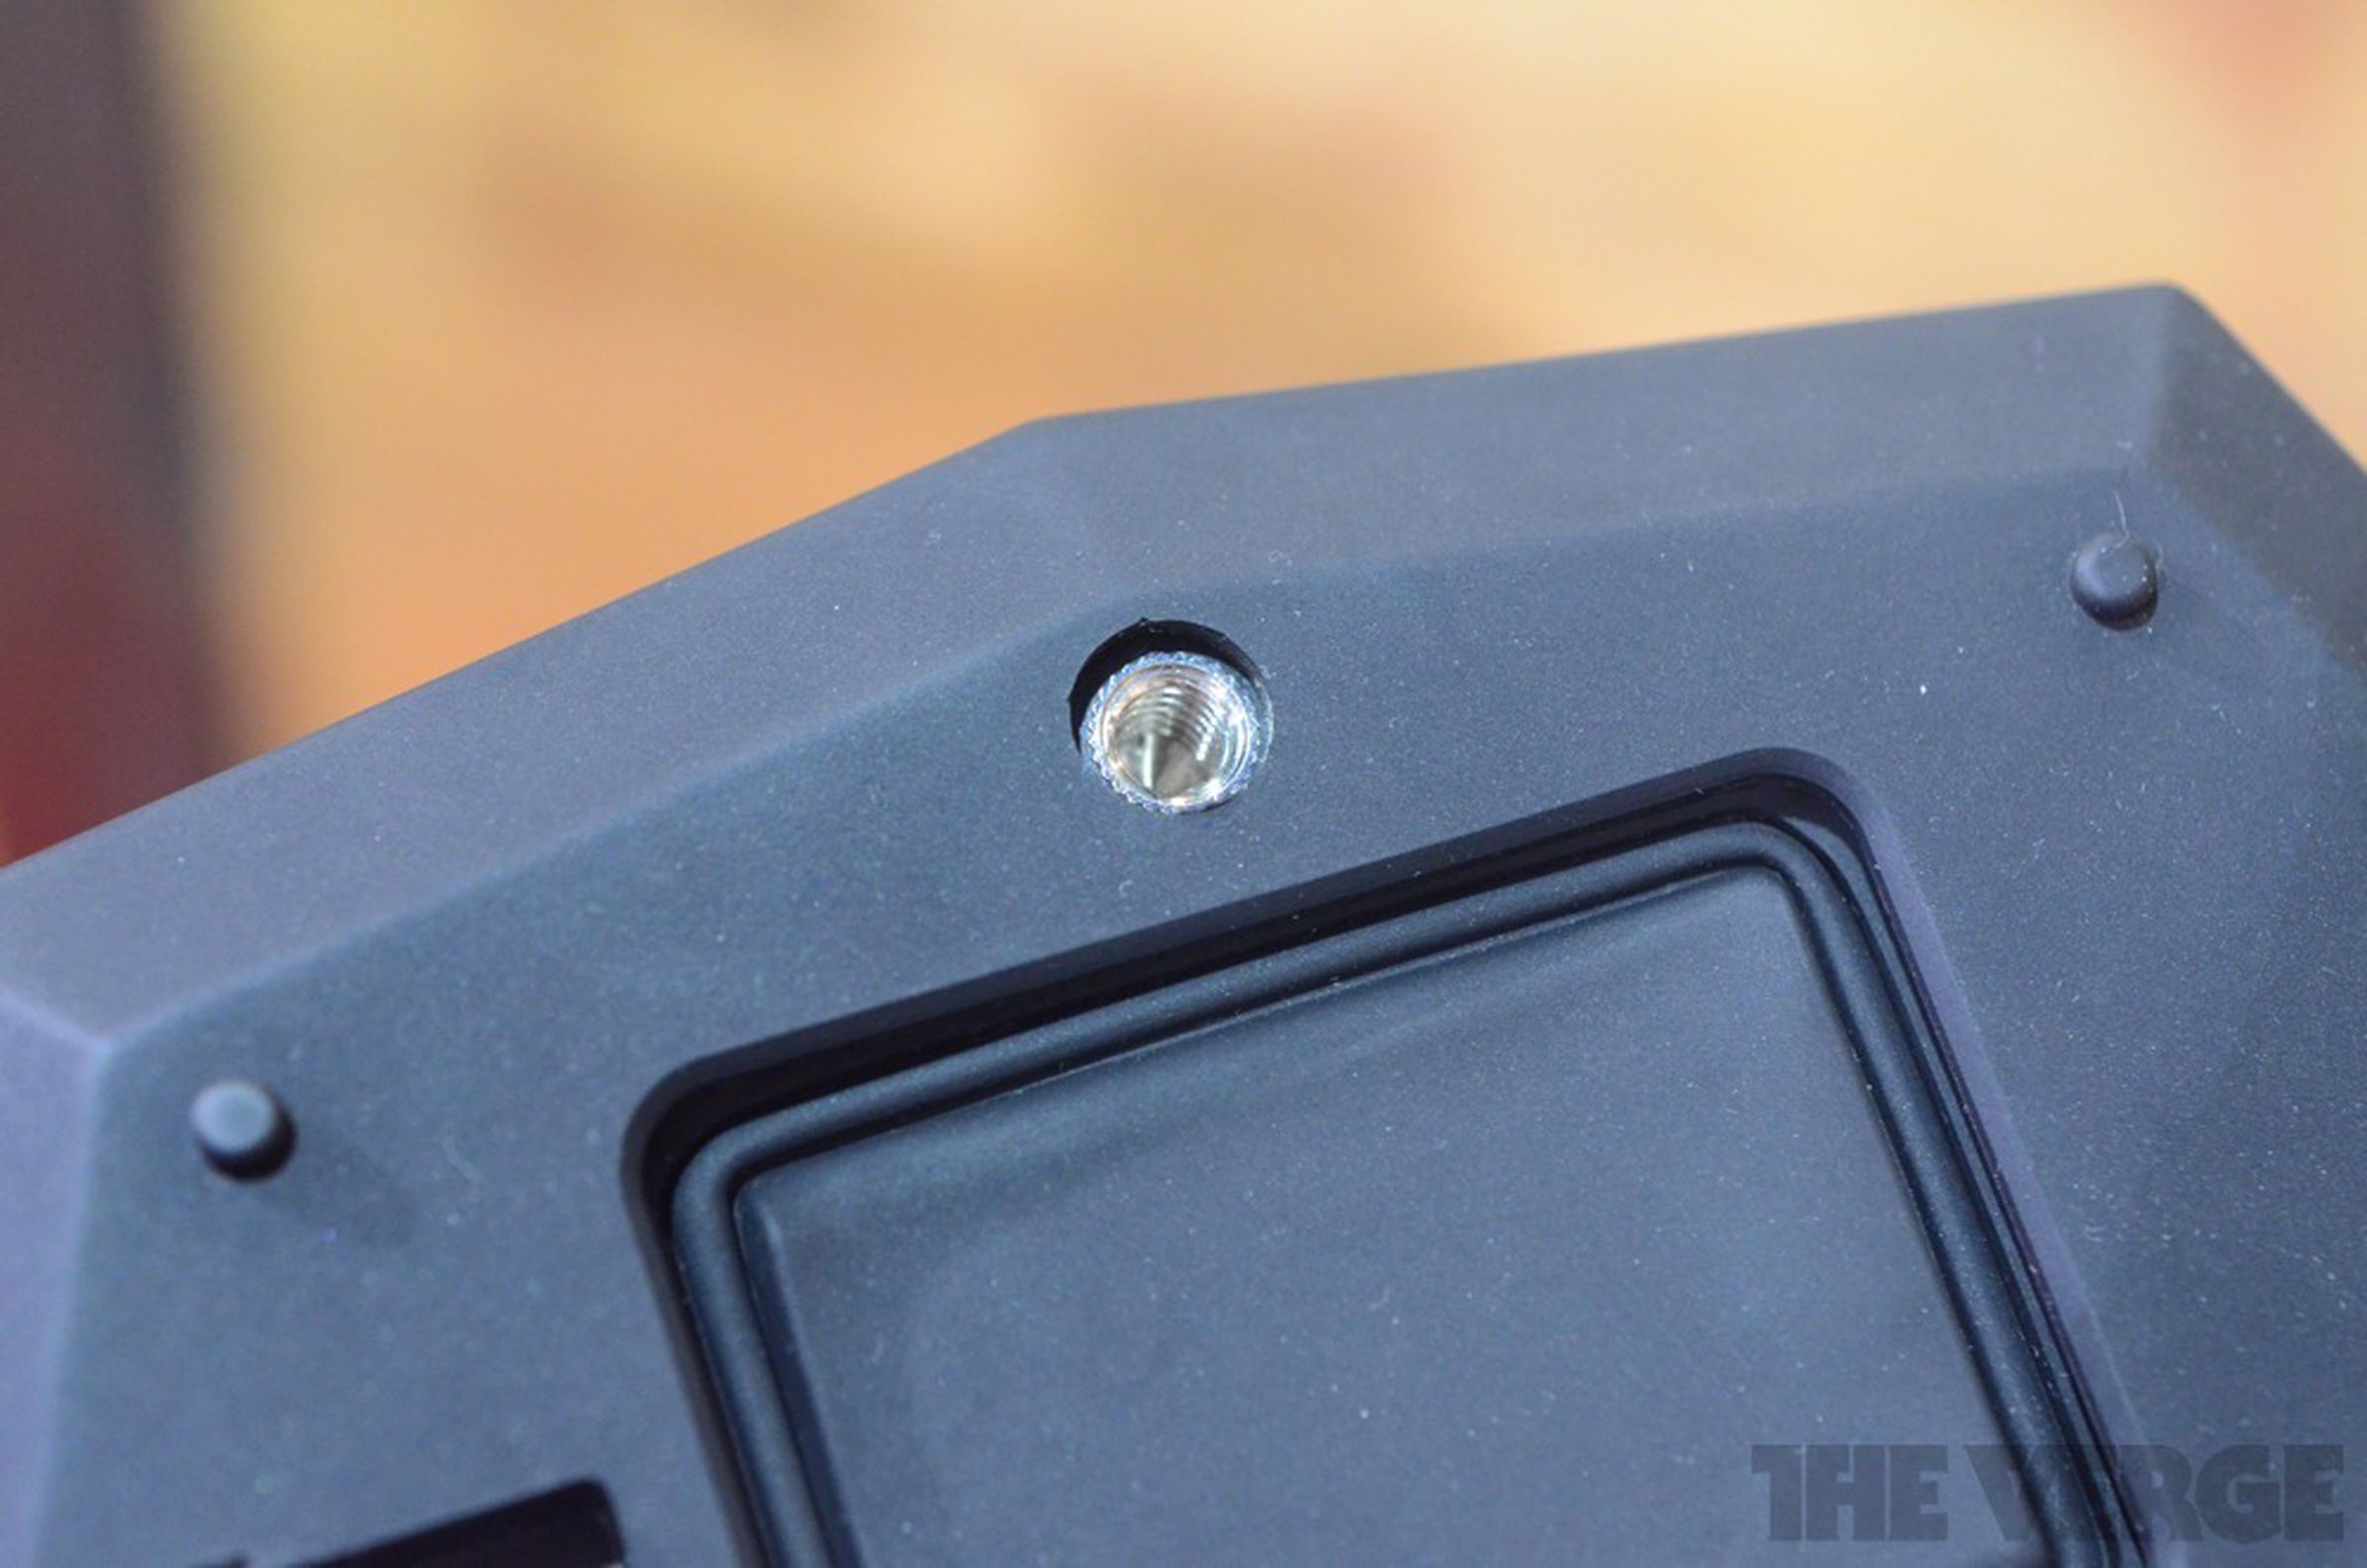 Outdoor Tech Turtle Shell speakers and OT Rocks headphones hands-on photos